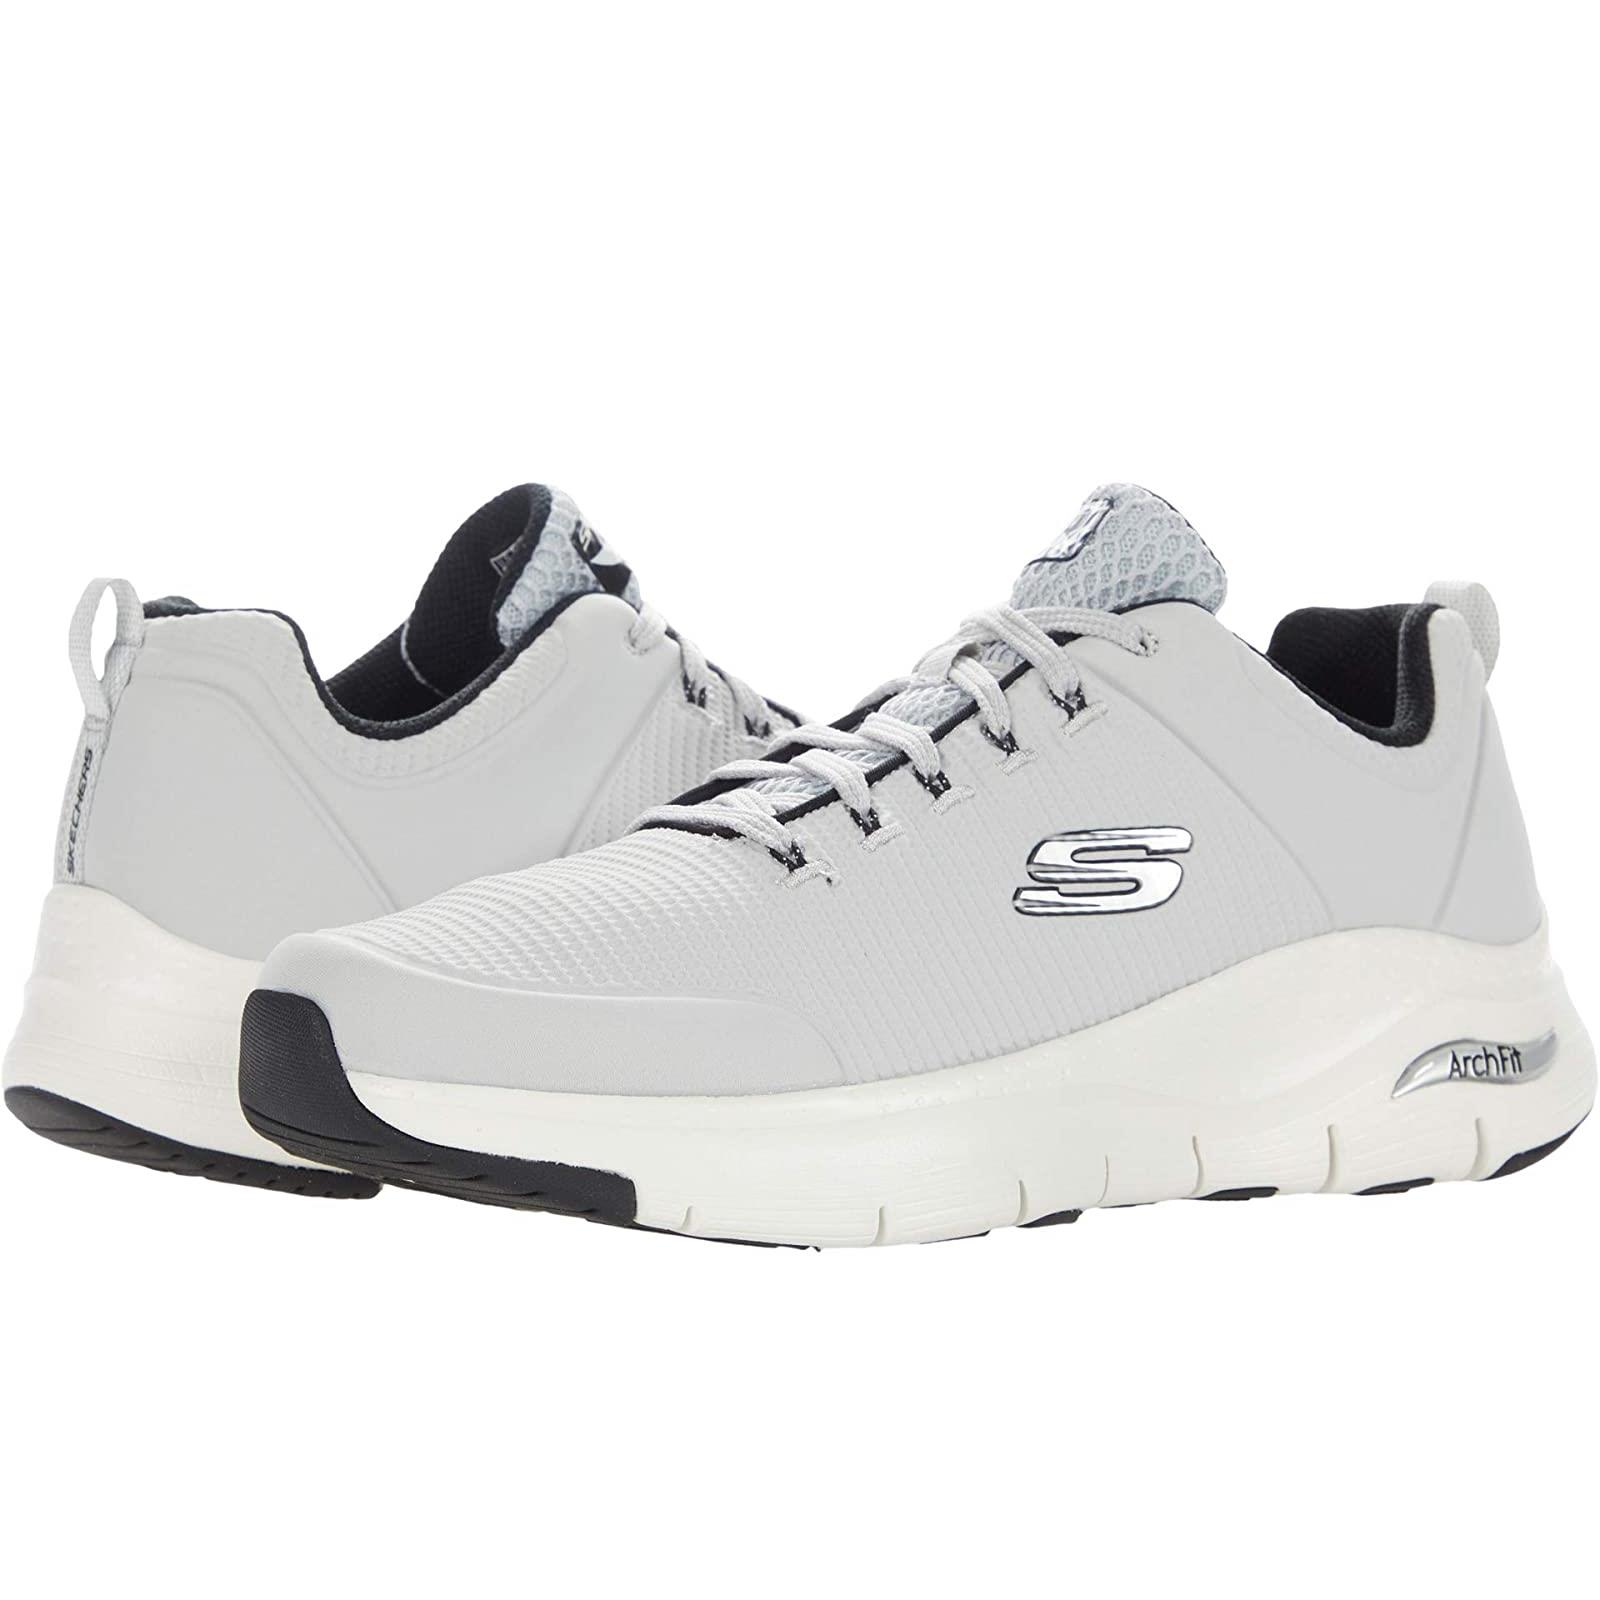 Man`s Sneakers Athletic Shoes Skechers Arch Fit Titan Light Gray/Black